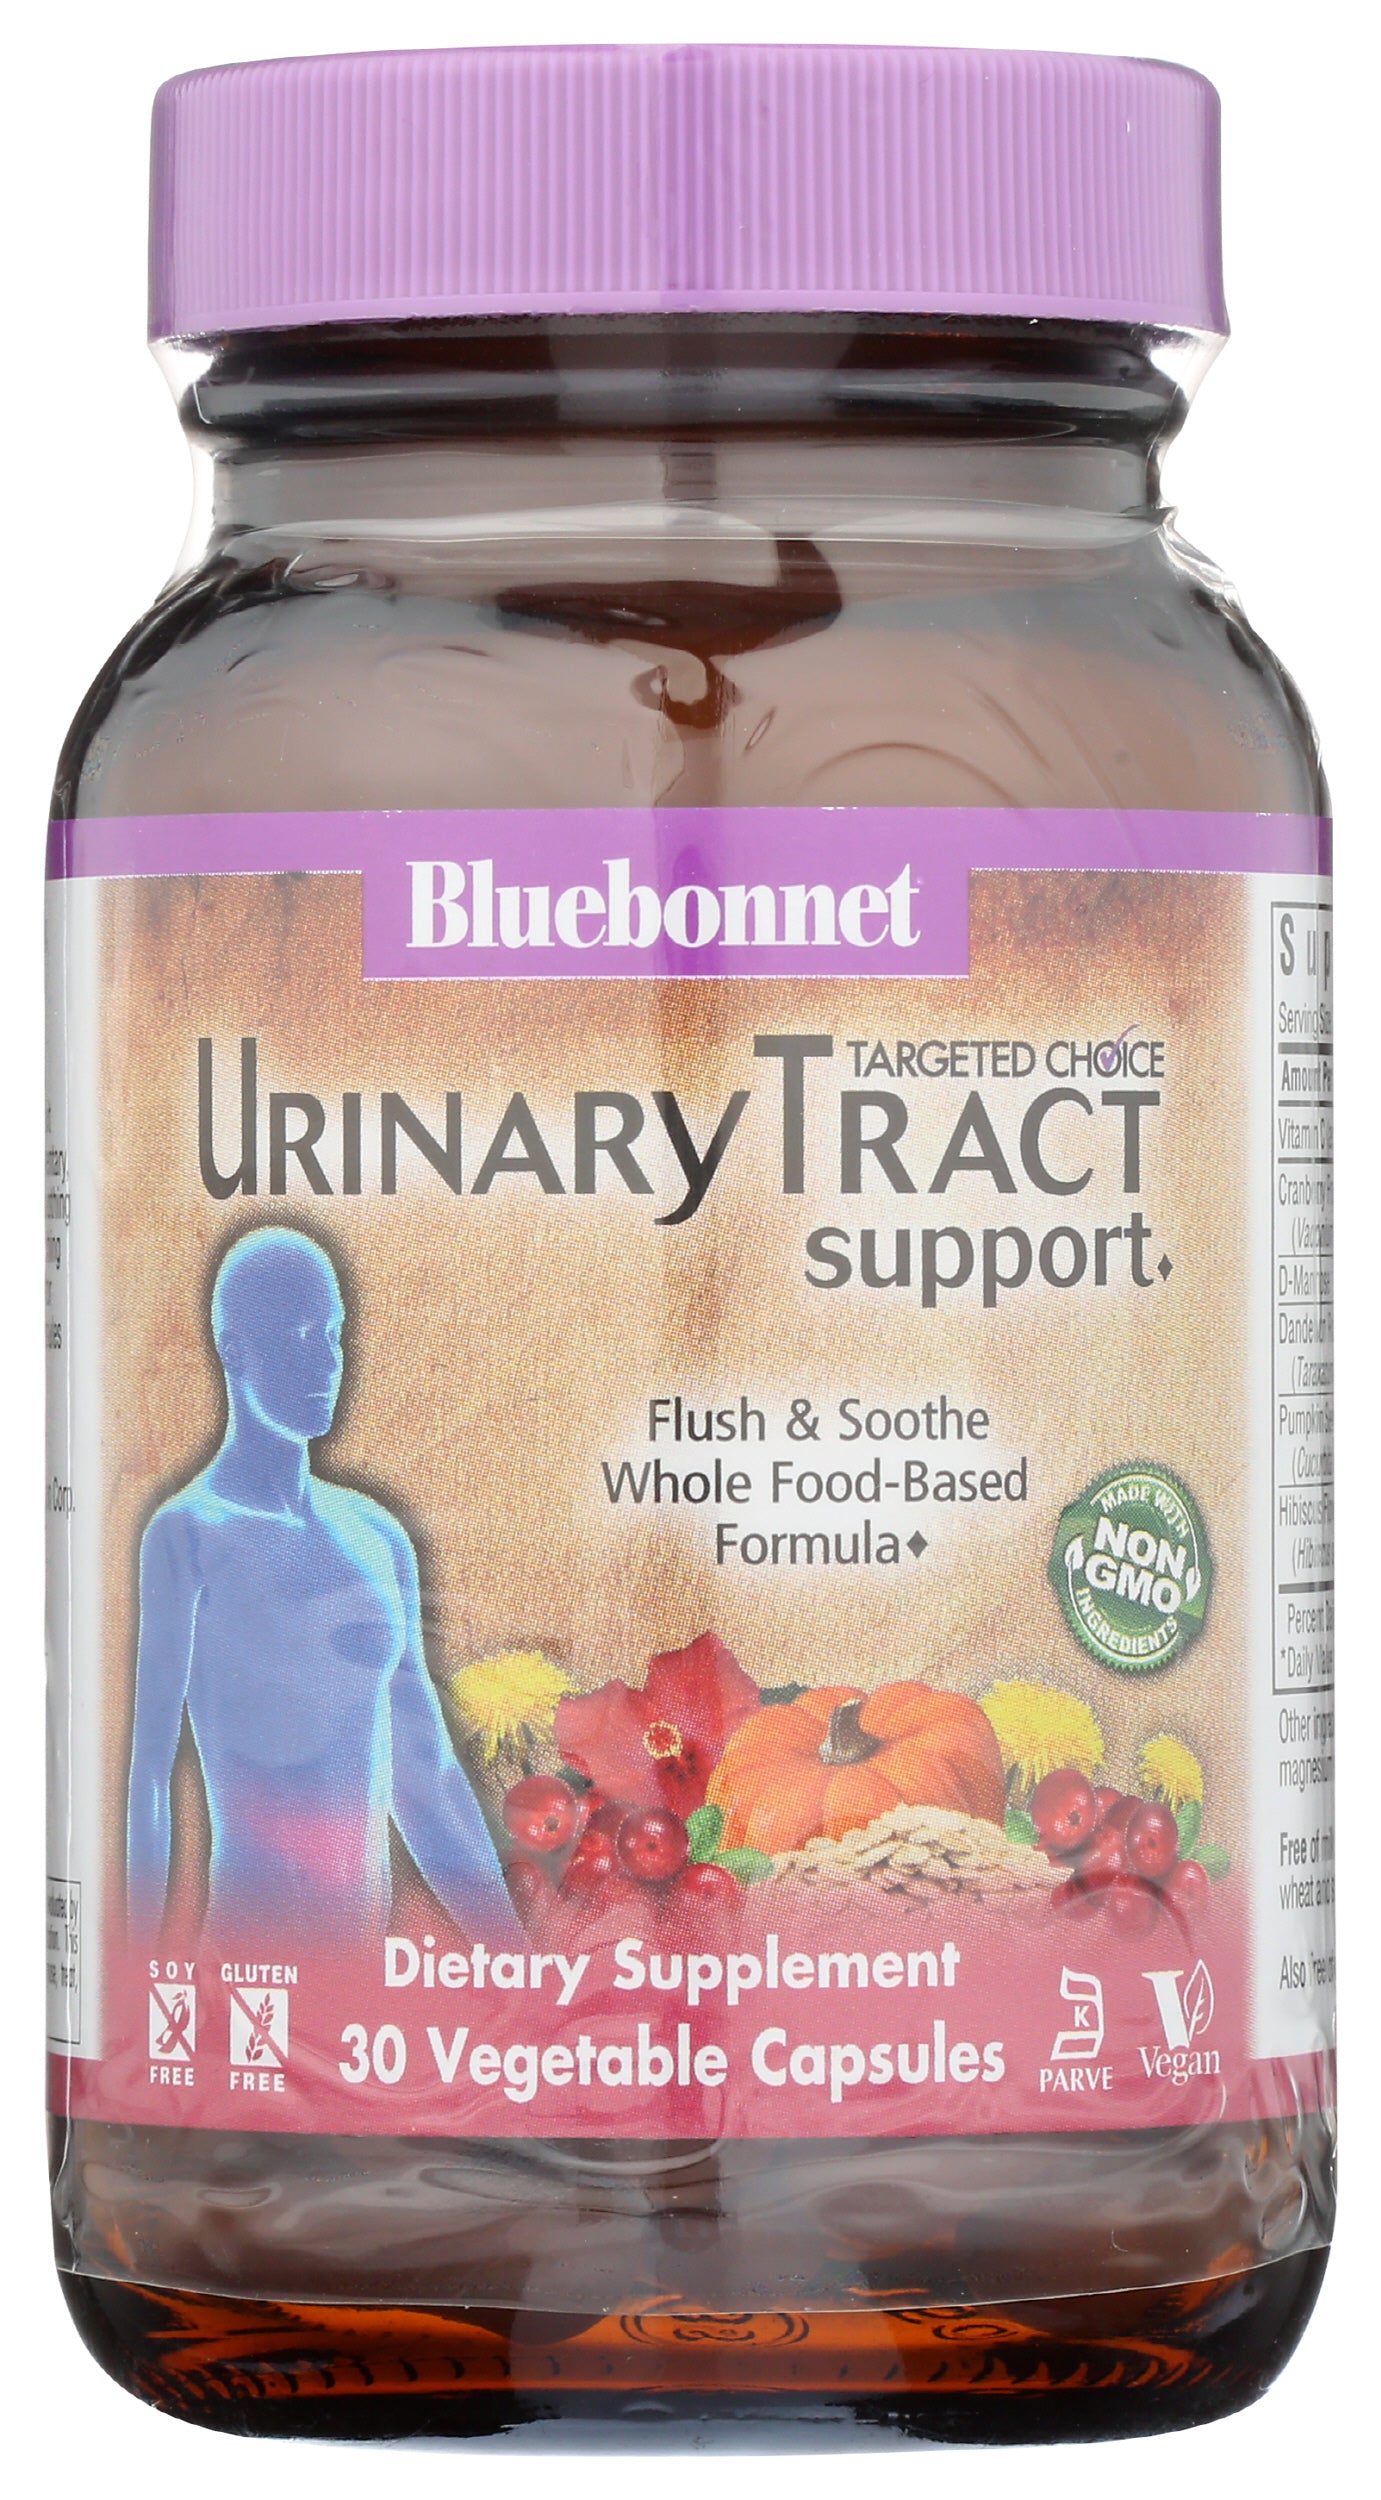 Bluebonnet Urinary Tract Support 30 Vegetable Capsules